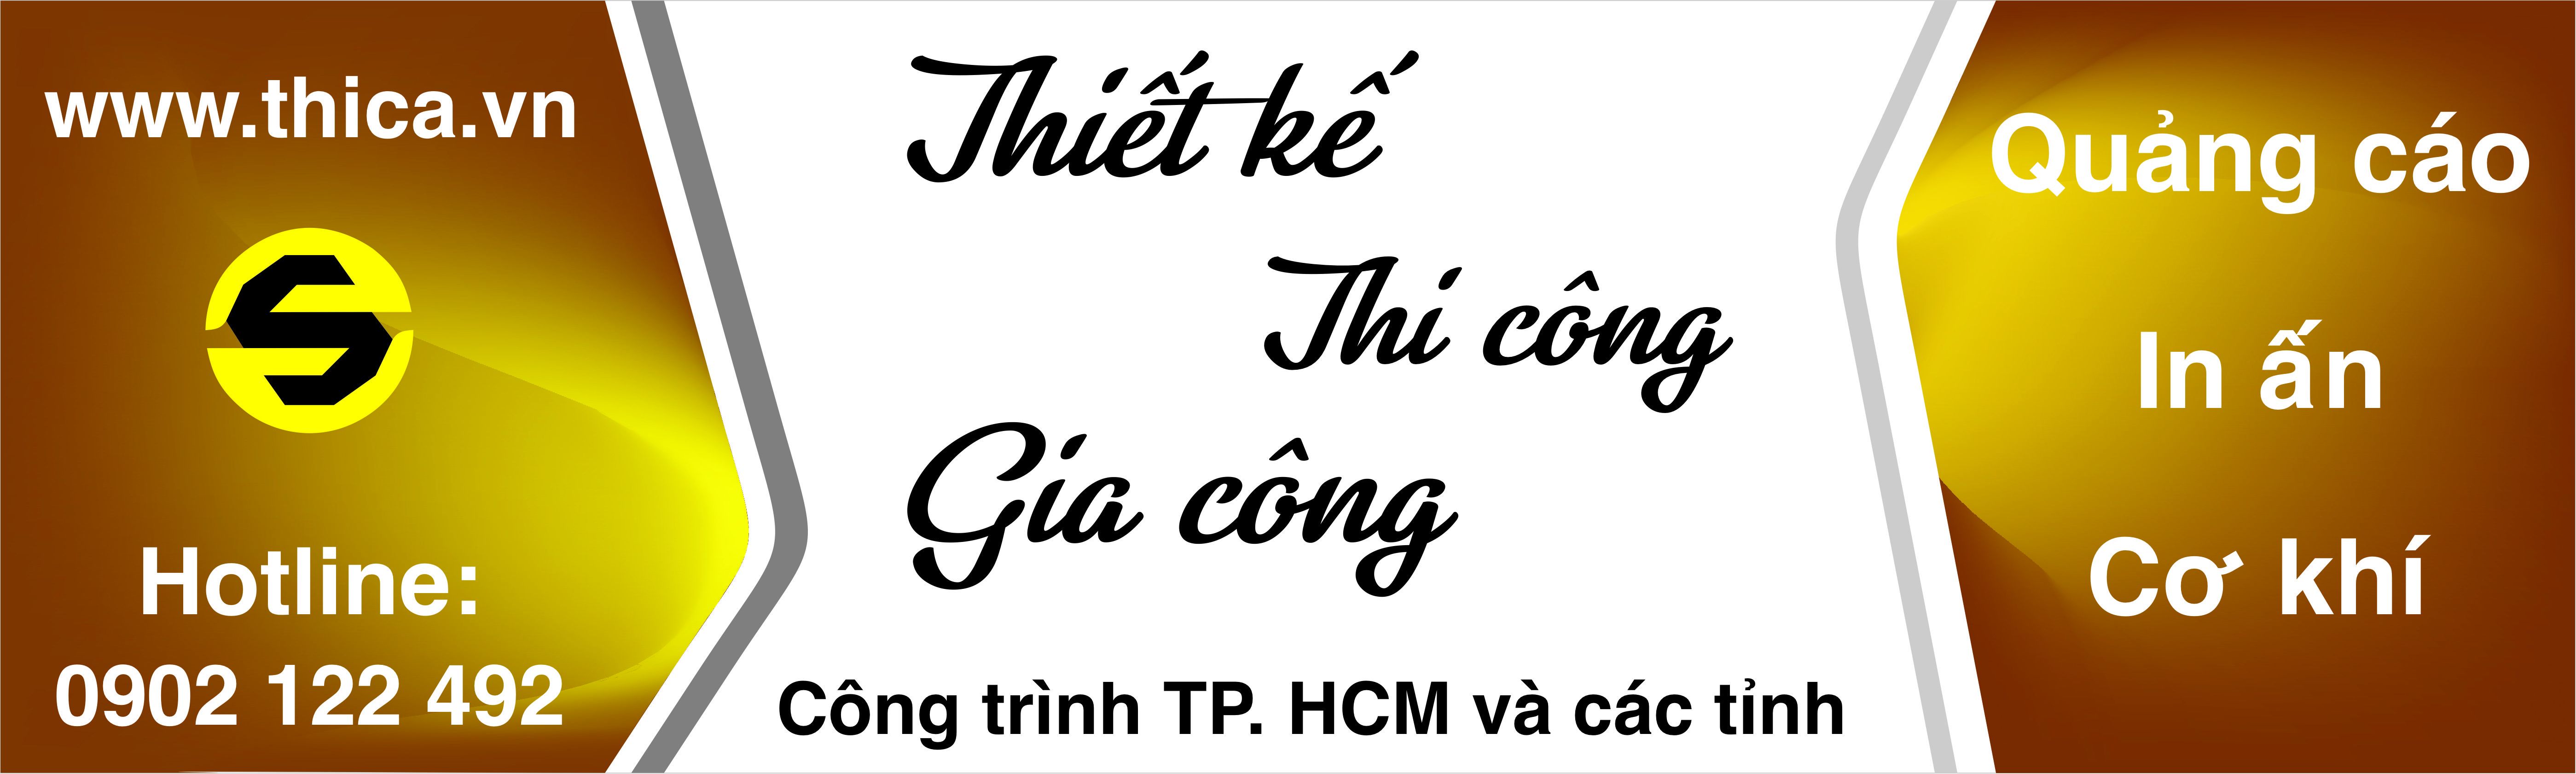 slide show www.thica.vn 5